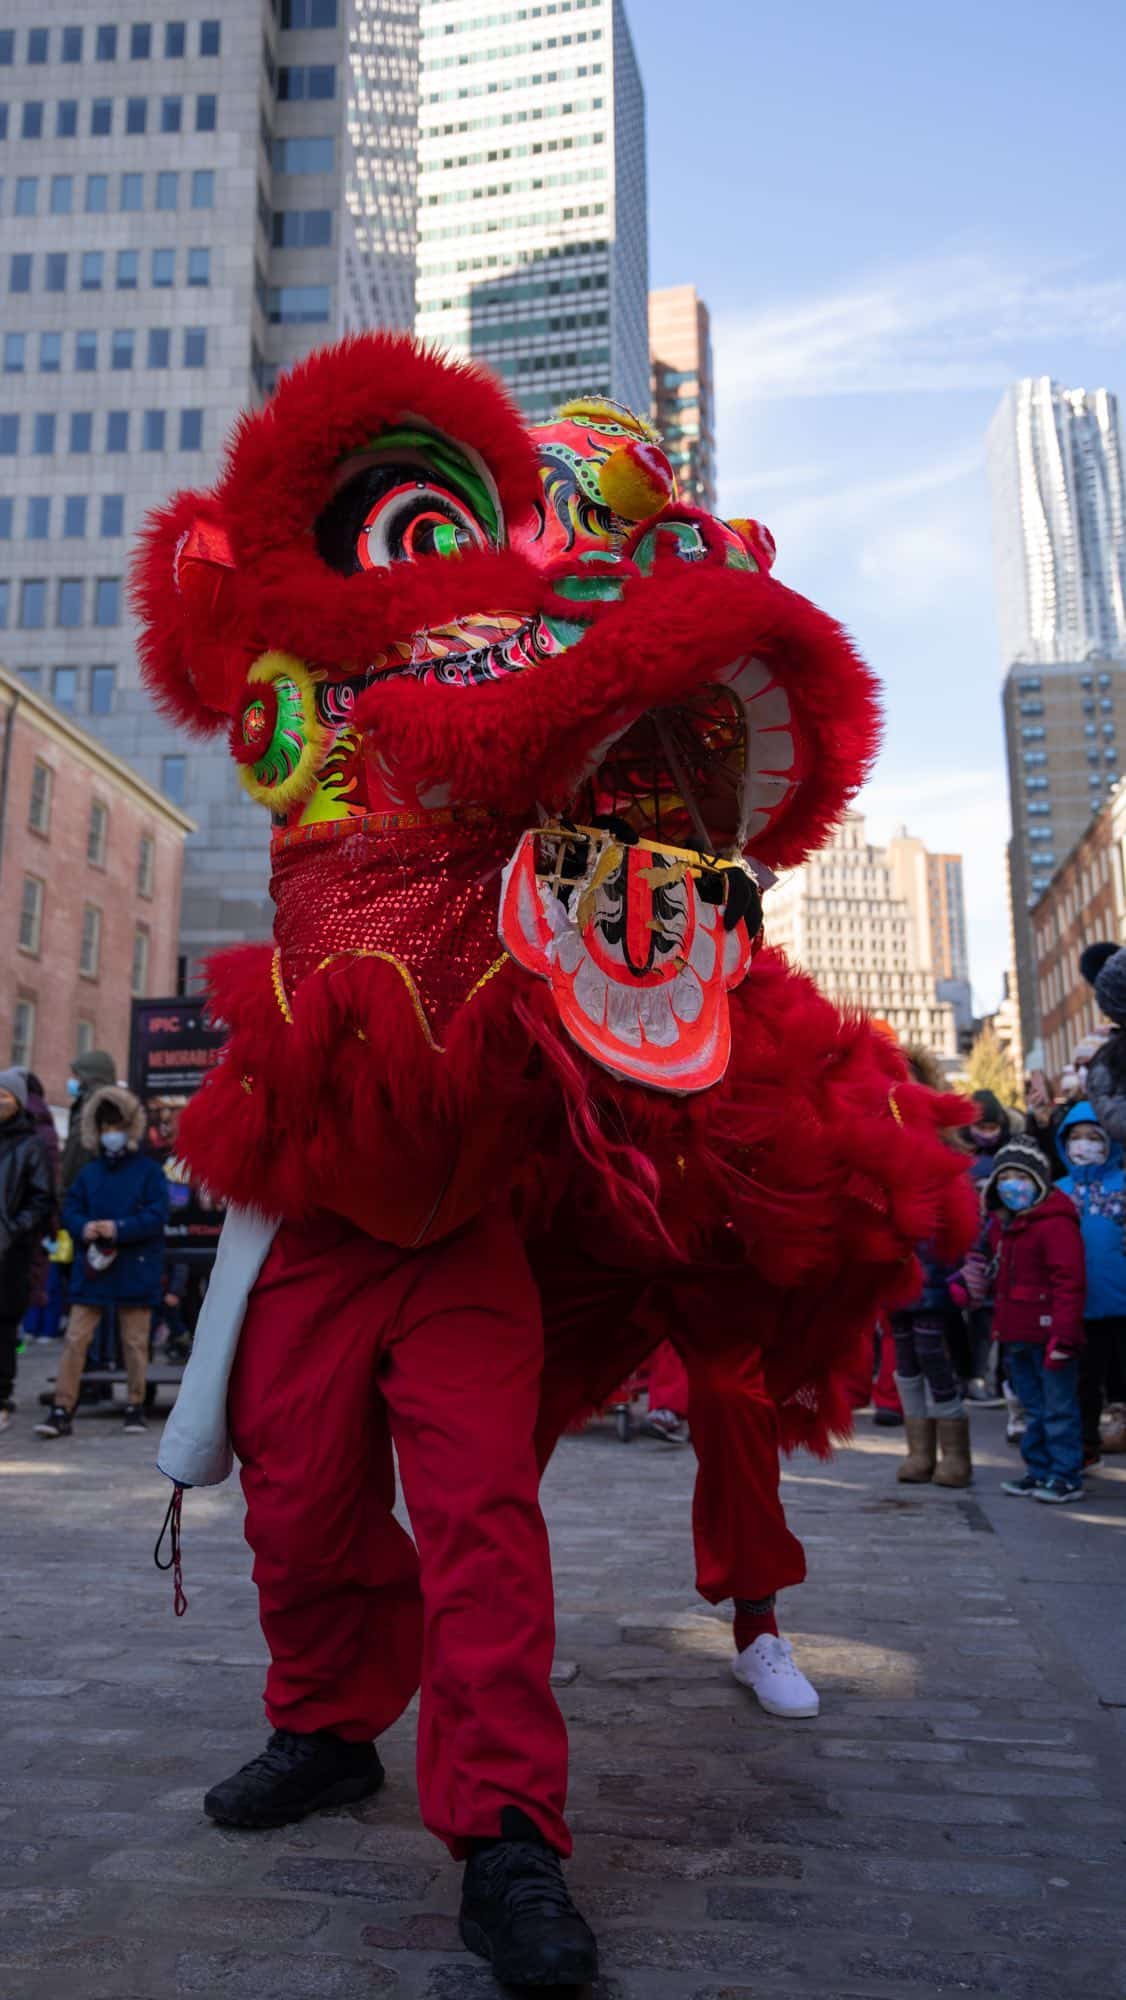 Honoring family. Festive meals. Performance and tradition. It’s all part of the Lunar New Year celebrations. #TheSeaport is thrilled to be taking part to welcome the Year of the Rabbit. Learn more ➤ link in bio